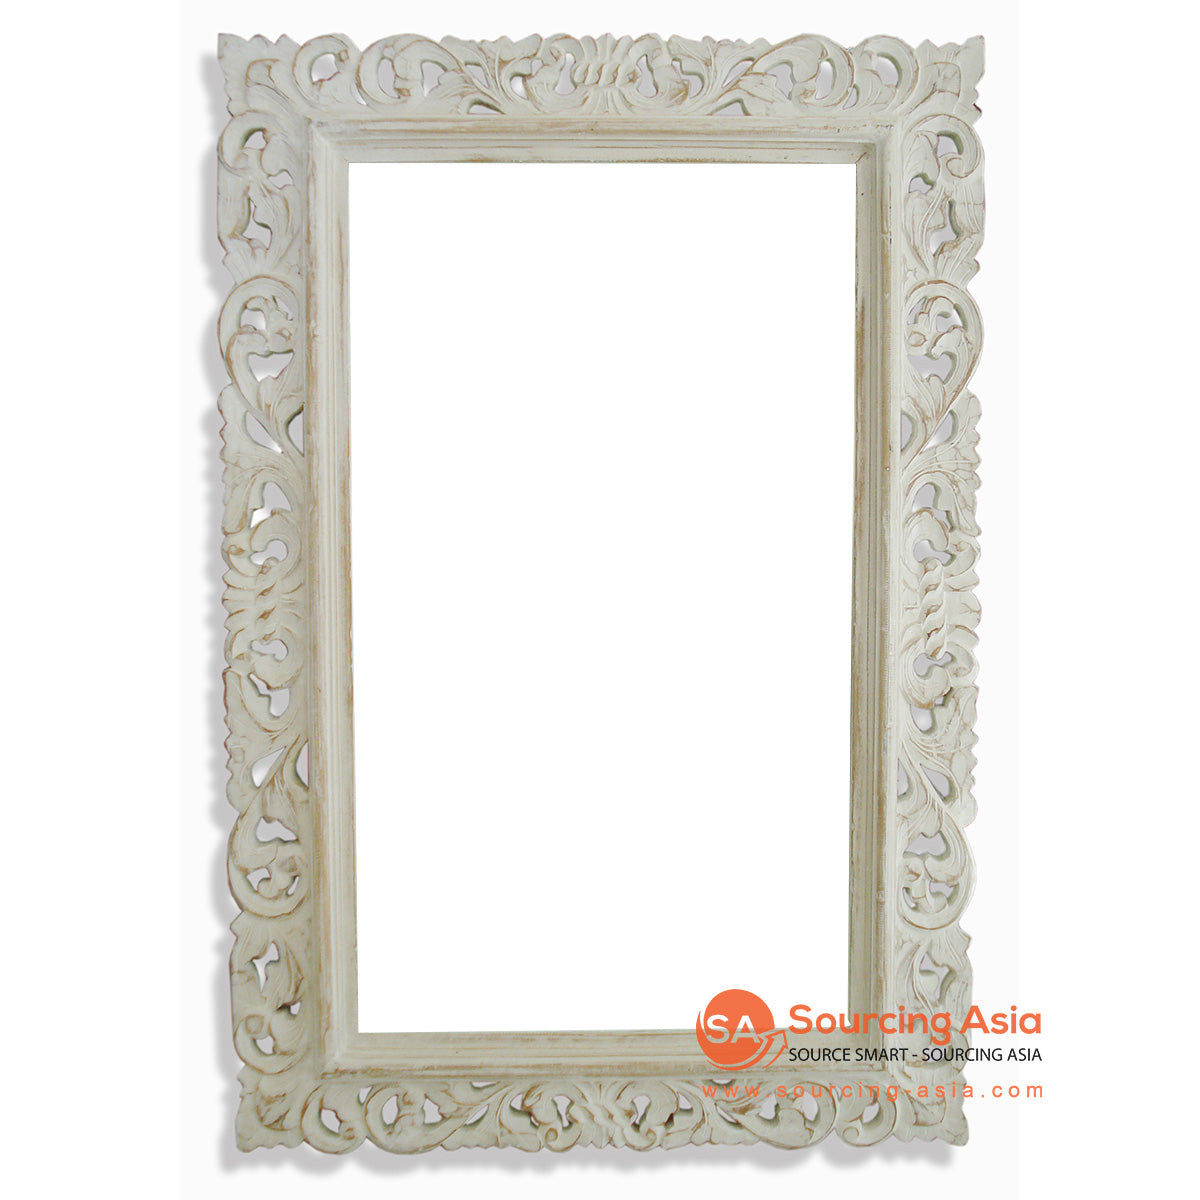 SSU001-WW WHITE WASH WOODEN MIRROR WITH CARVING